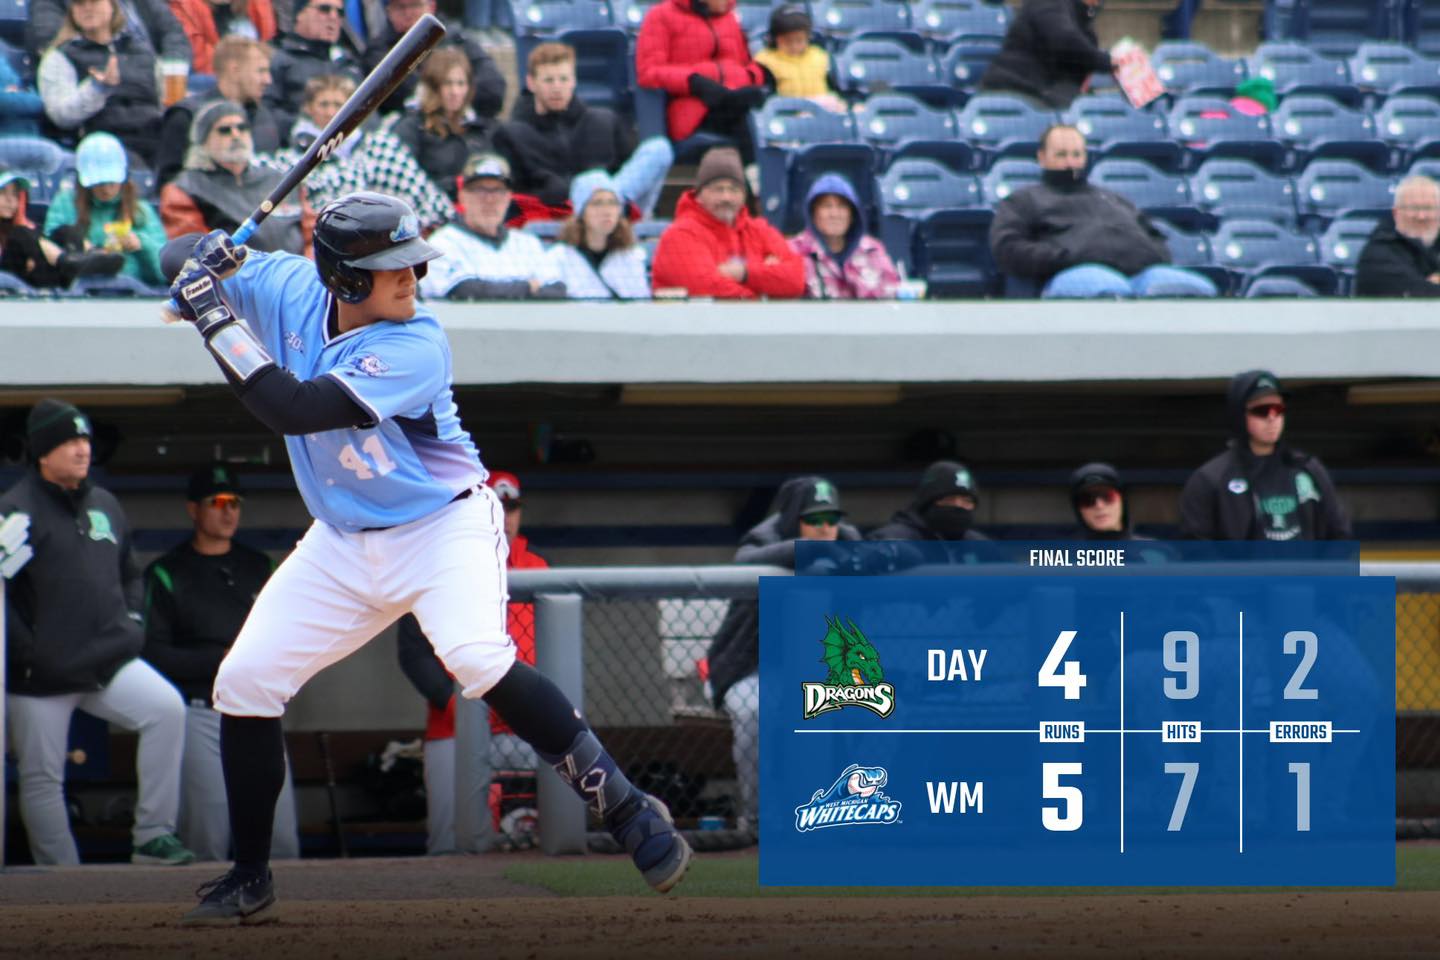 Whitecaps catch a break, escape with 5-4 victory over Dragons